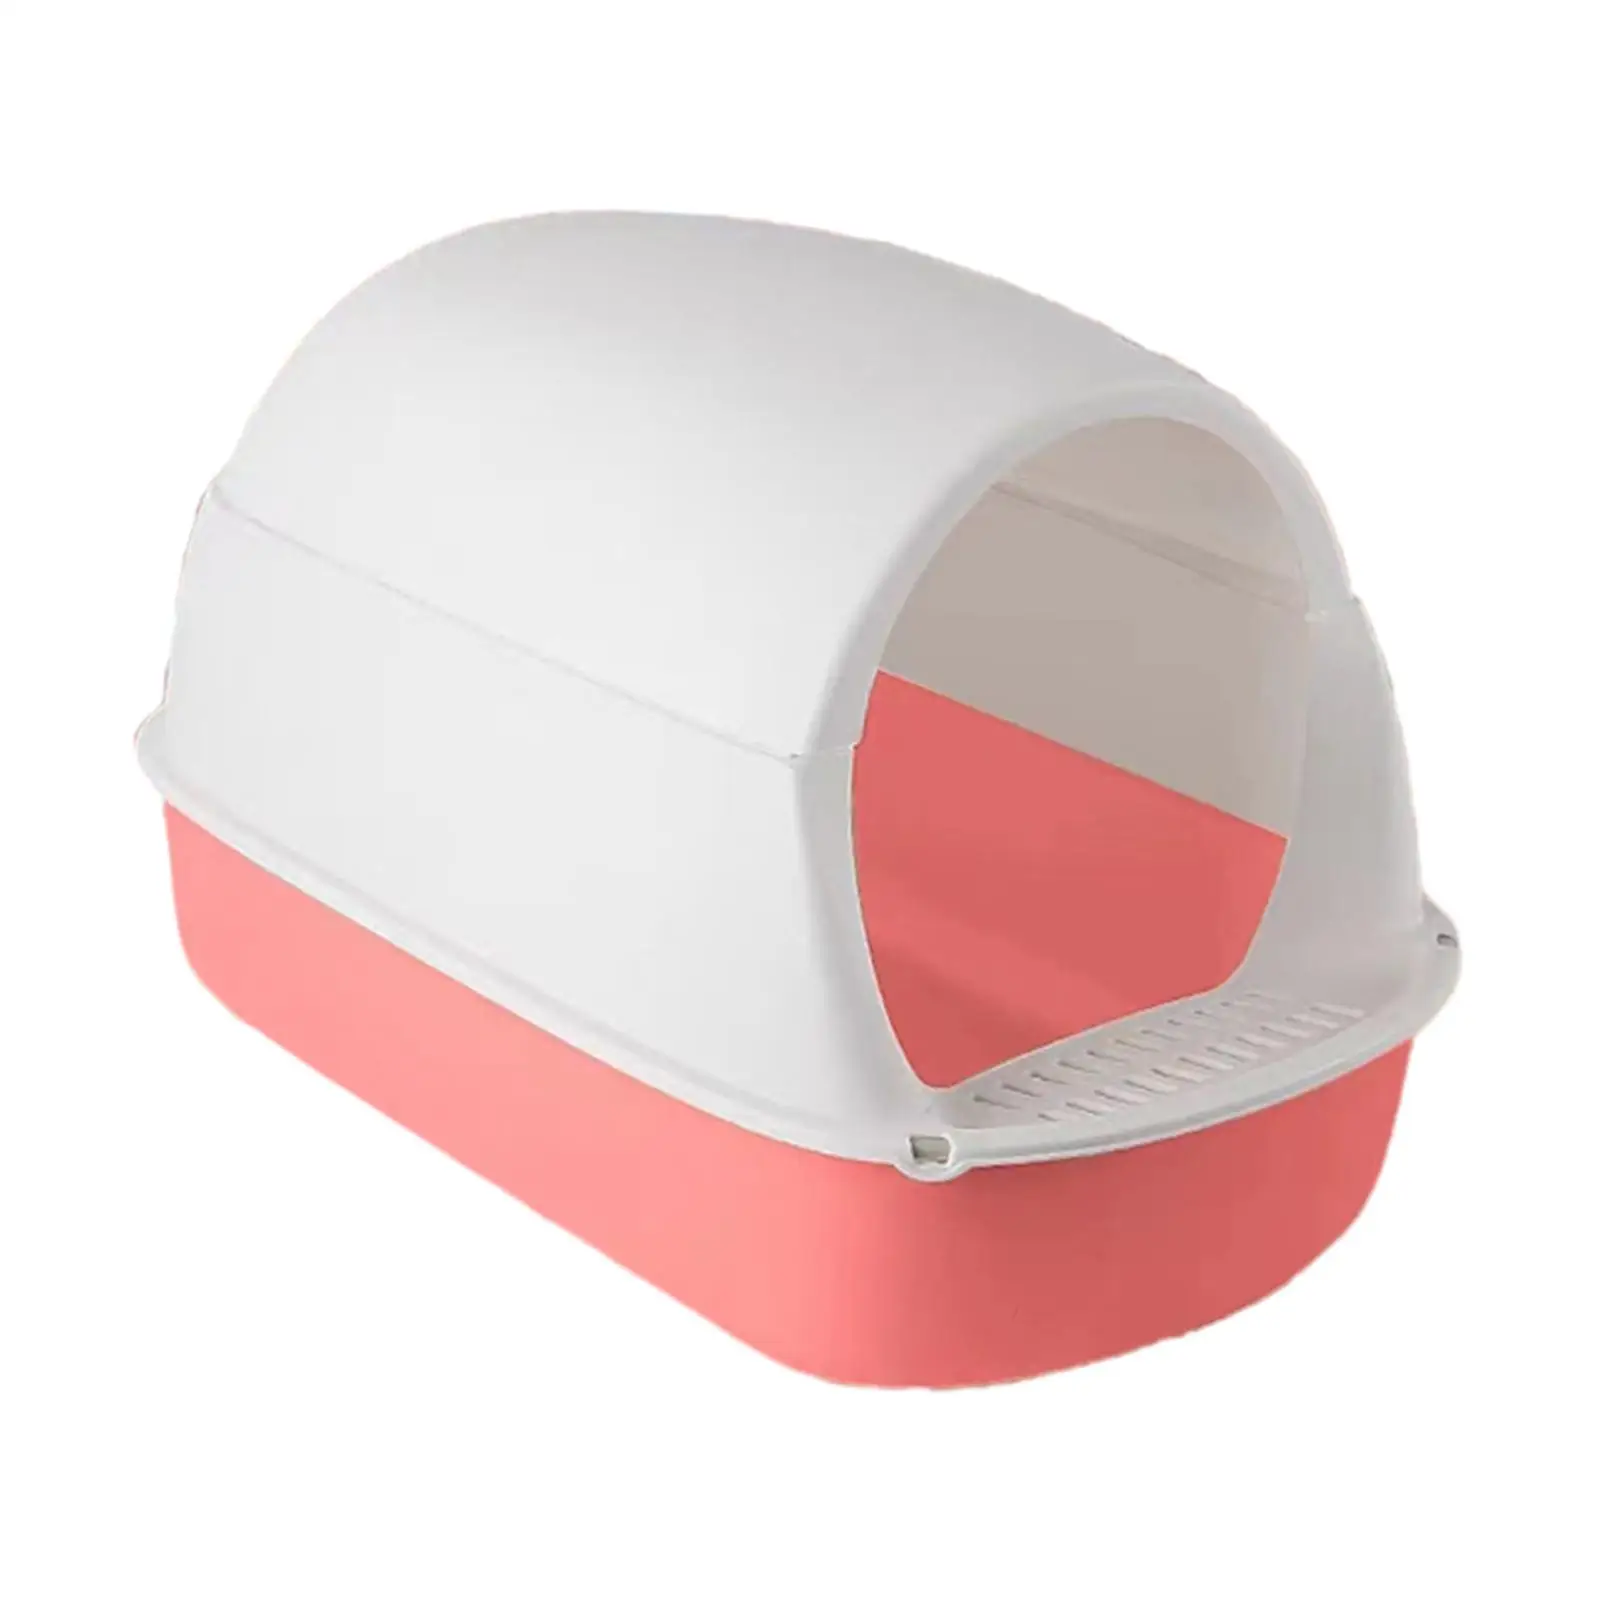 Hooded Cat Litter Box with Lid Detachable Pet Accessories Anti Splashing Portable Odorless Enclosed Cat Toilet Cat Litter Tray